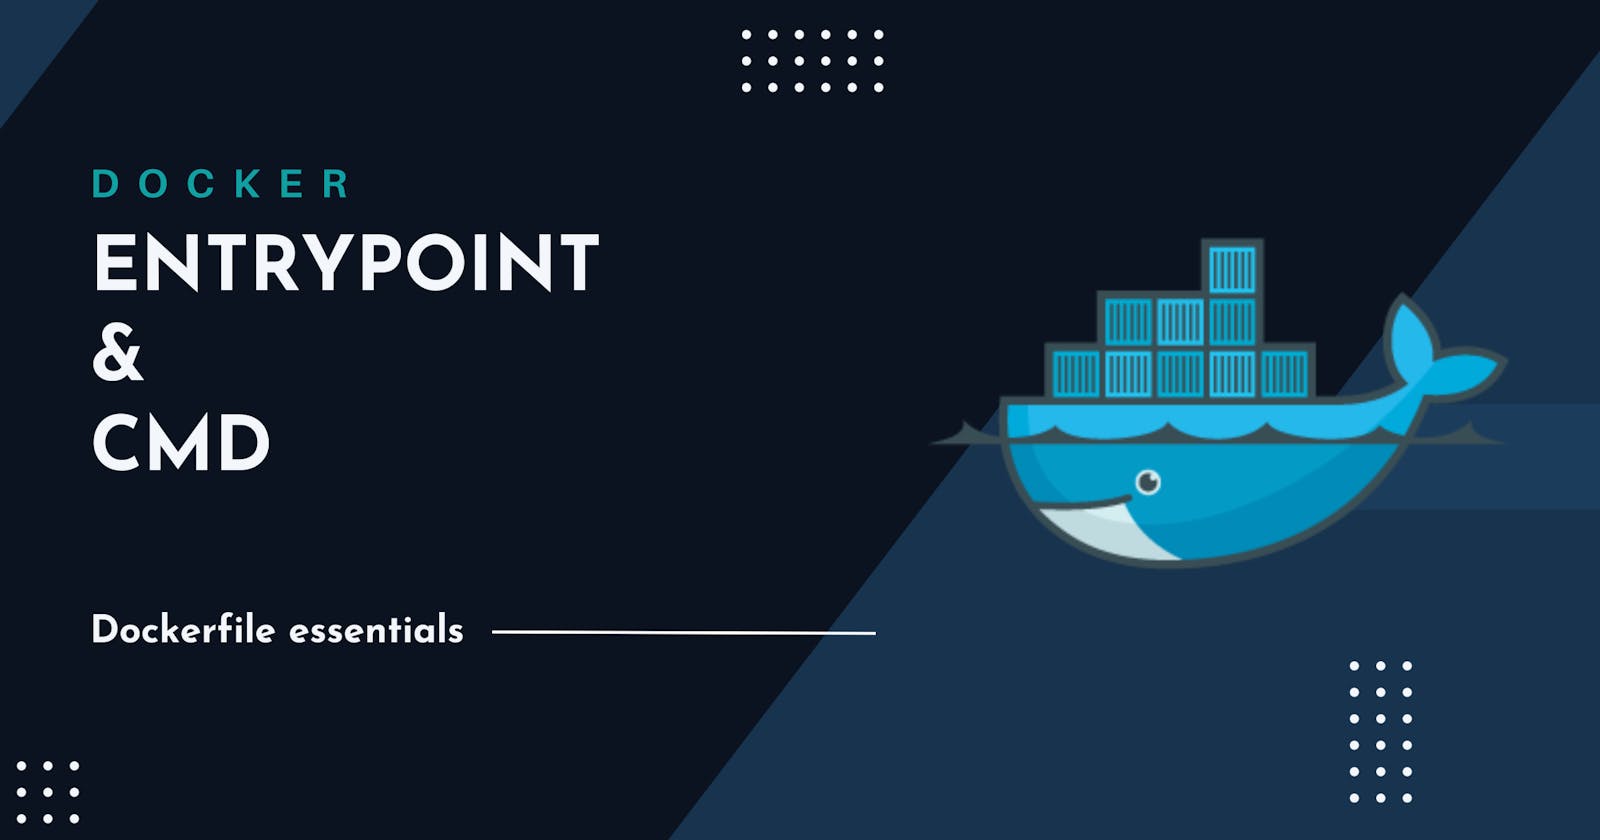 DOCKER: The ENTRYPOINT and CMD